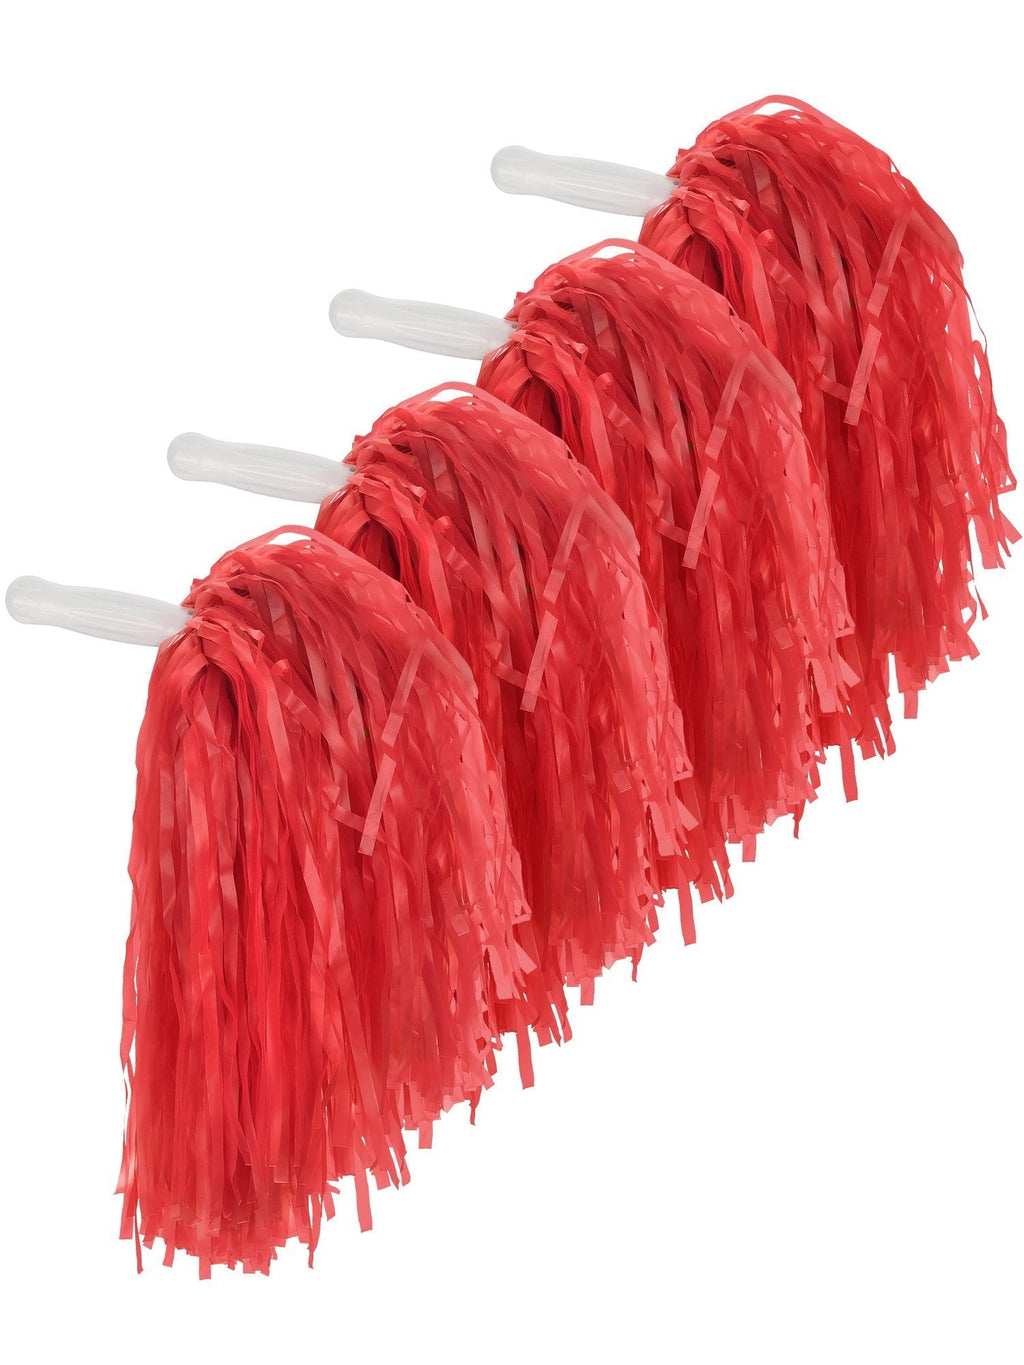 [AUSTRALIA] - 2 Pairs Plastic Cheerleader Cheerleading Pom Poms for Party Costume Fancy Dress Dance and Sport Party Dance Red 